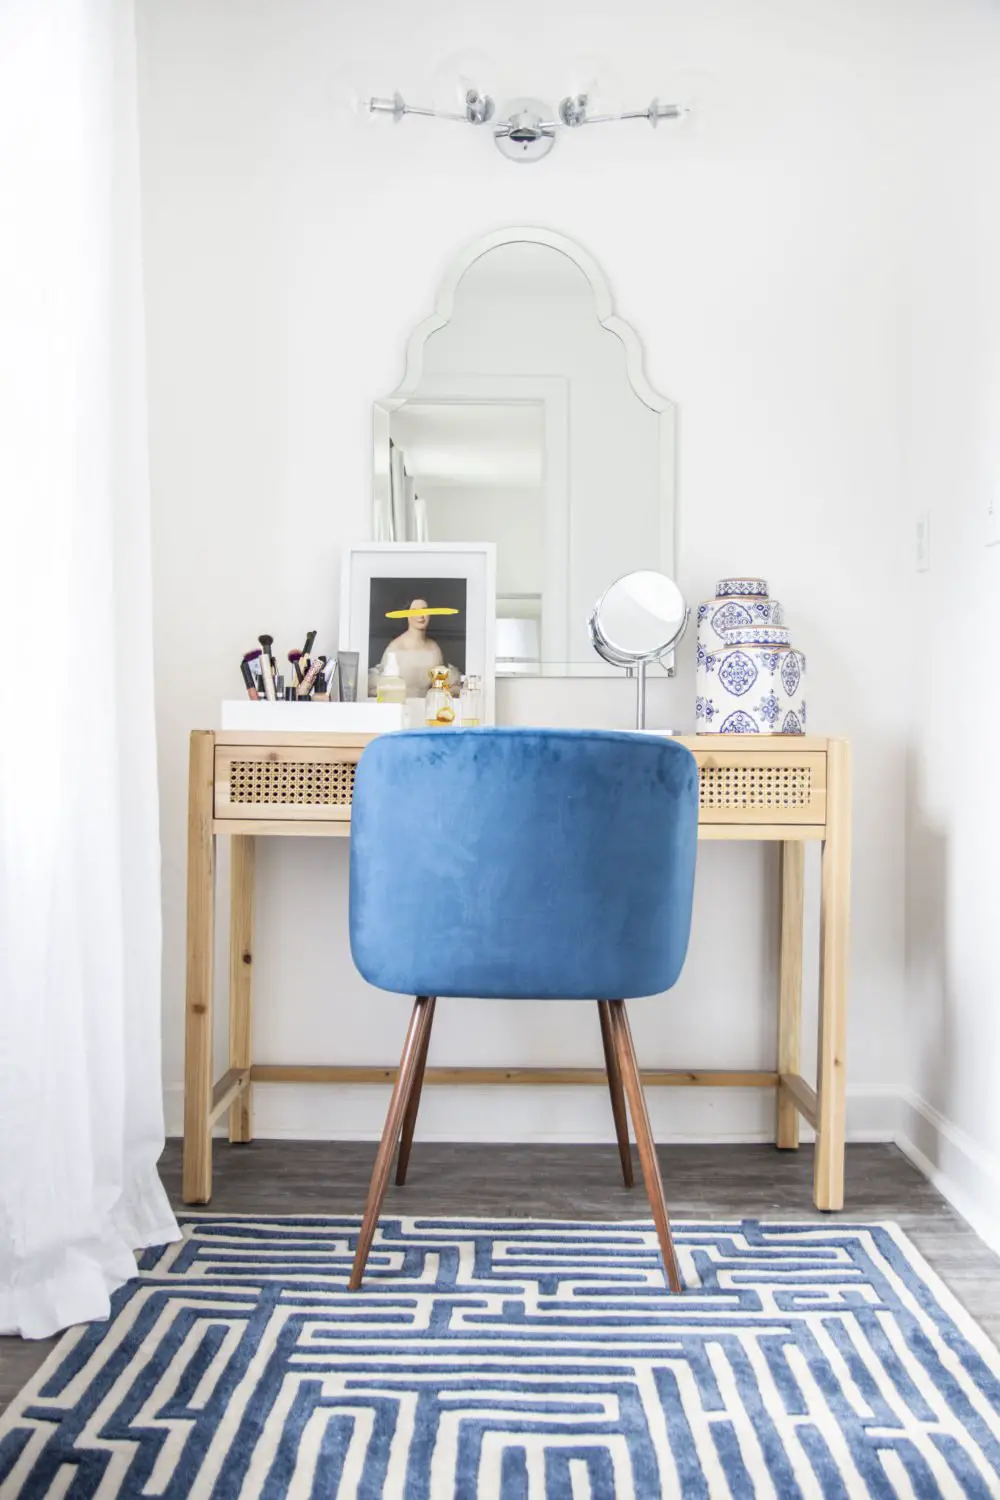 Blue and white vanity room in master suite with cane console desk, blue velvet chair, and Moroccan mirror on Thou Swell @thouswellblog #vanity #vanityroom #vanitydesign #masterbedroom #mastersuite #interior #interiordesign